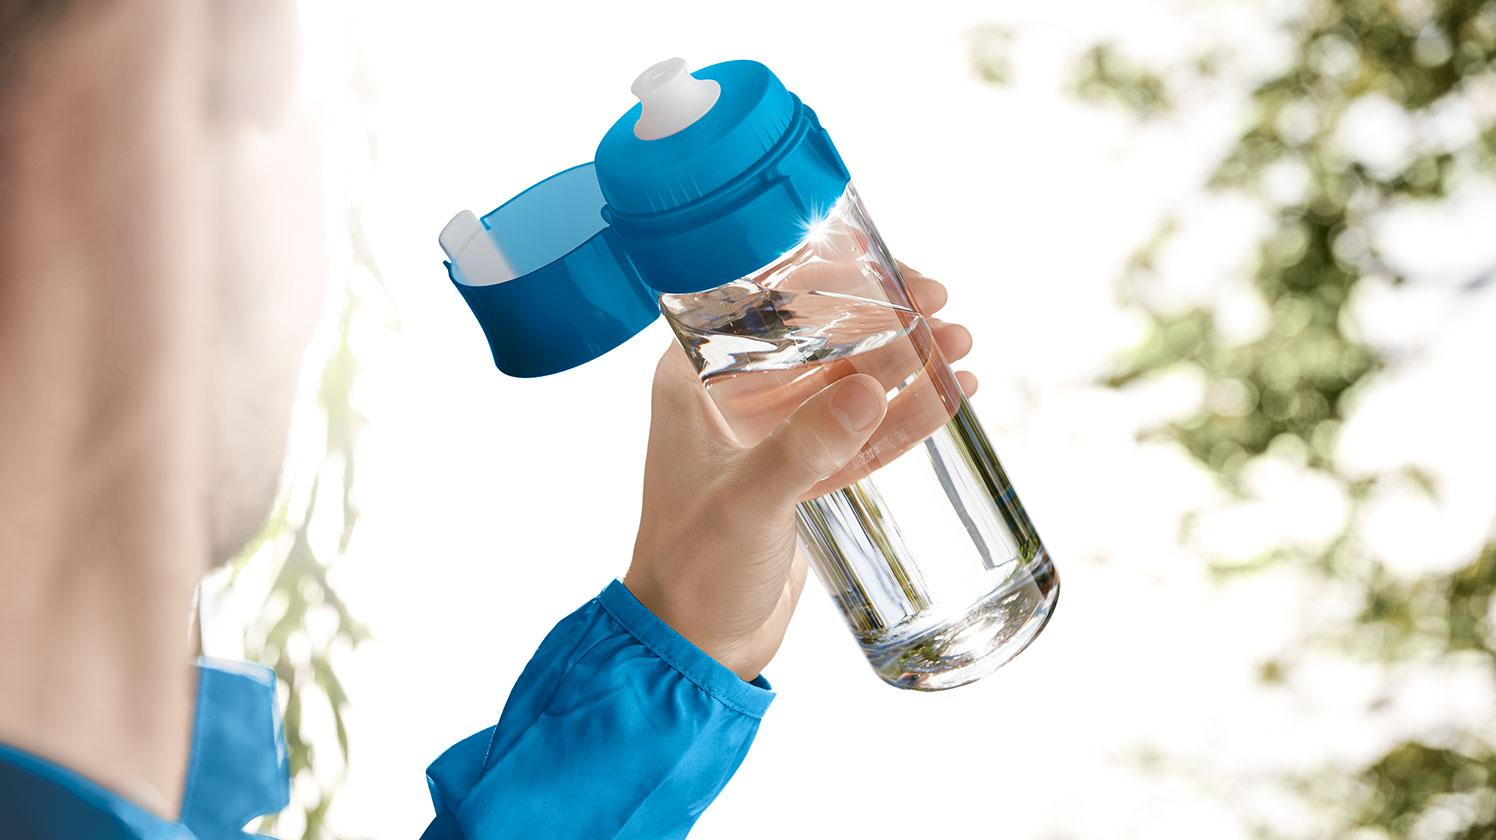 Brita Water Bottle Fill&Go Filter With 1 Microdisc Water Filtration Vital  E5